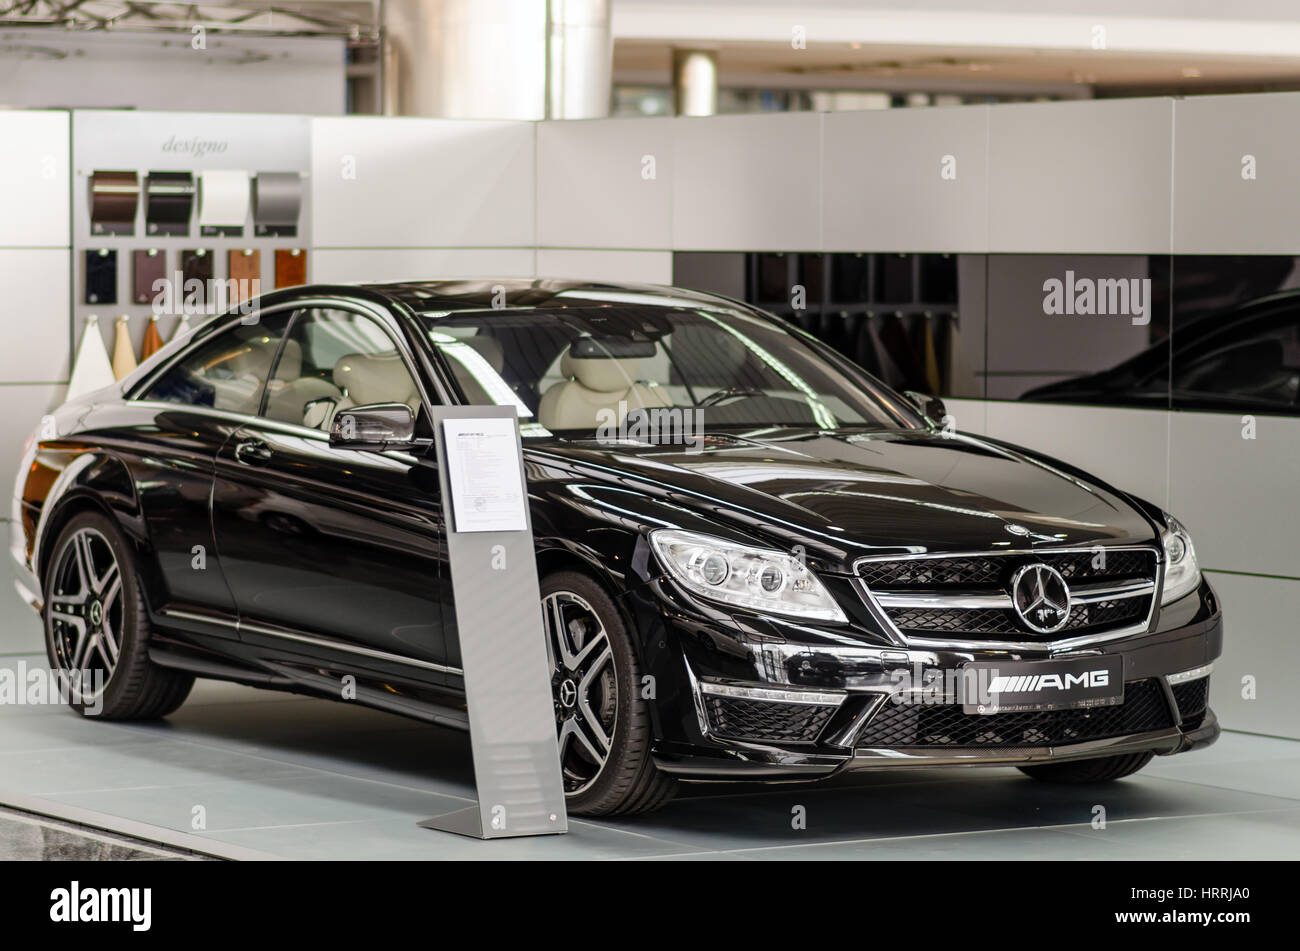 Kyiv, Ukraine - April 21th, 2014: Showroom. Mid-size luxury car Mercedes-Benz CL 63 AMG Coupe Stock Photo